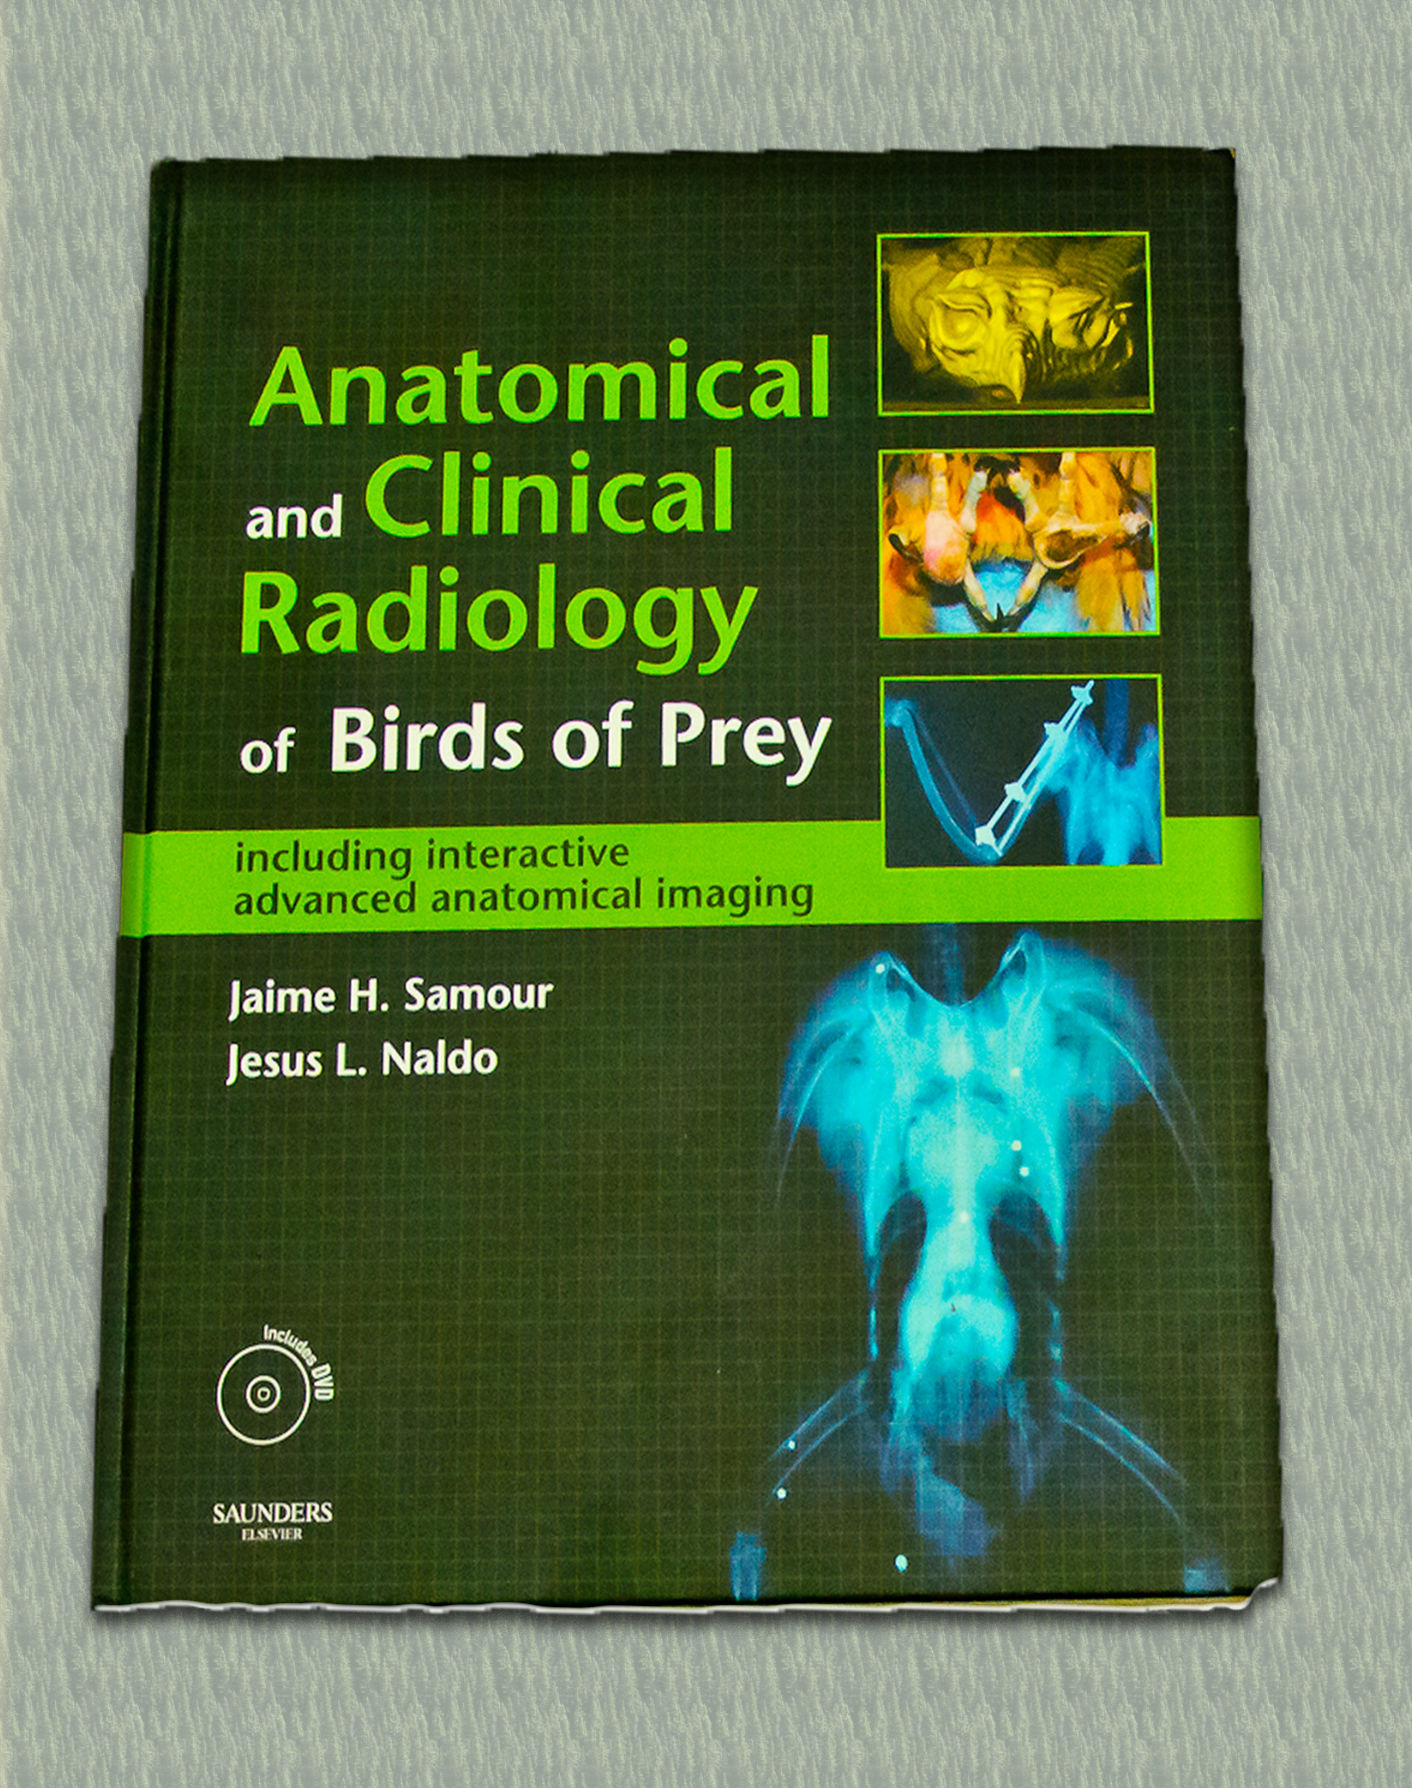 Anatomical and Clinical Radiology of Birds of Prey - Jaime Samour